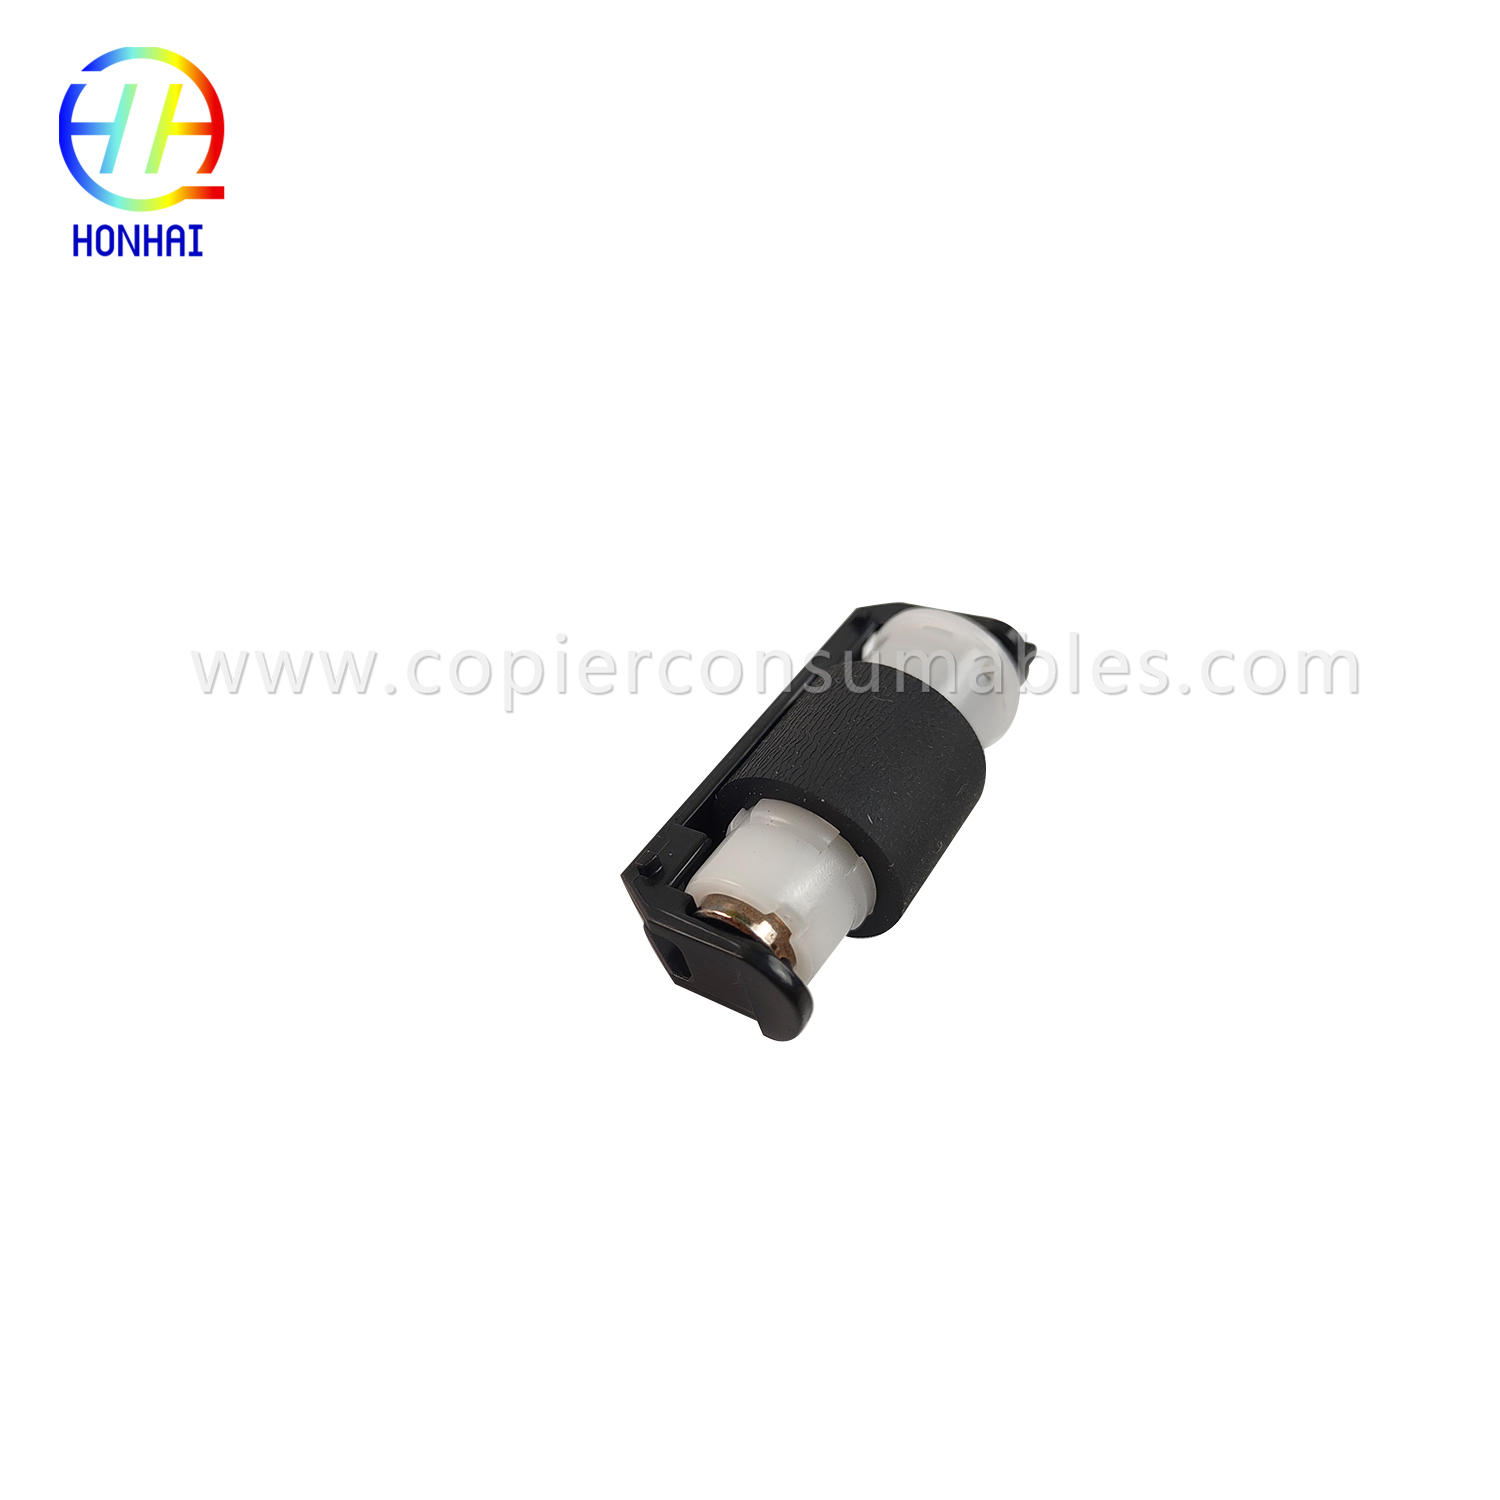 Cheap PriceList for Induction Power Supply - Separation Roller Assembly for HP CM1312 CM2320 CP2025 CP1215 CP1515 CP1518 CM1415 CP1525 RM14425000CN RM1-4425-000CN OEM – HONHAI